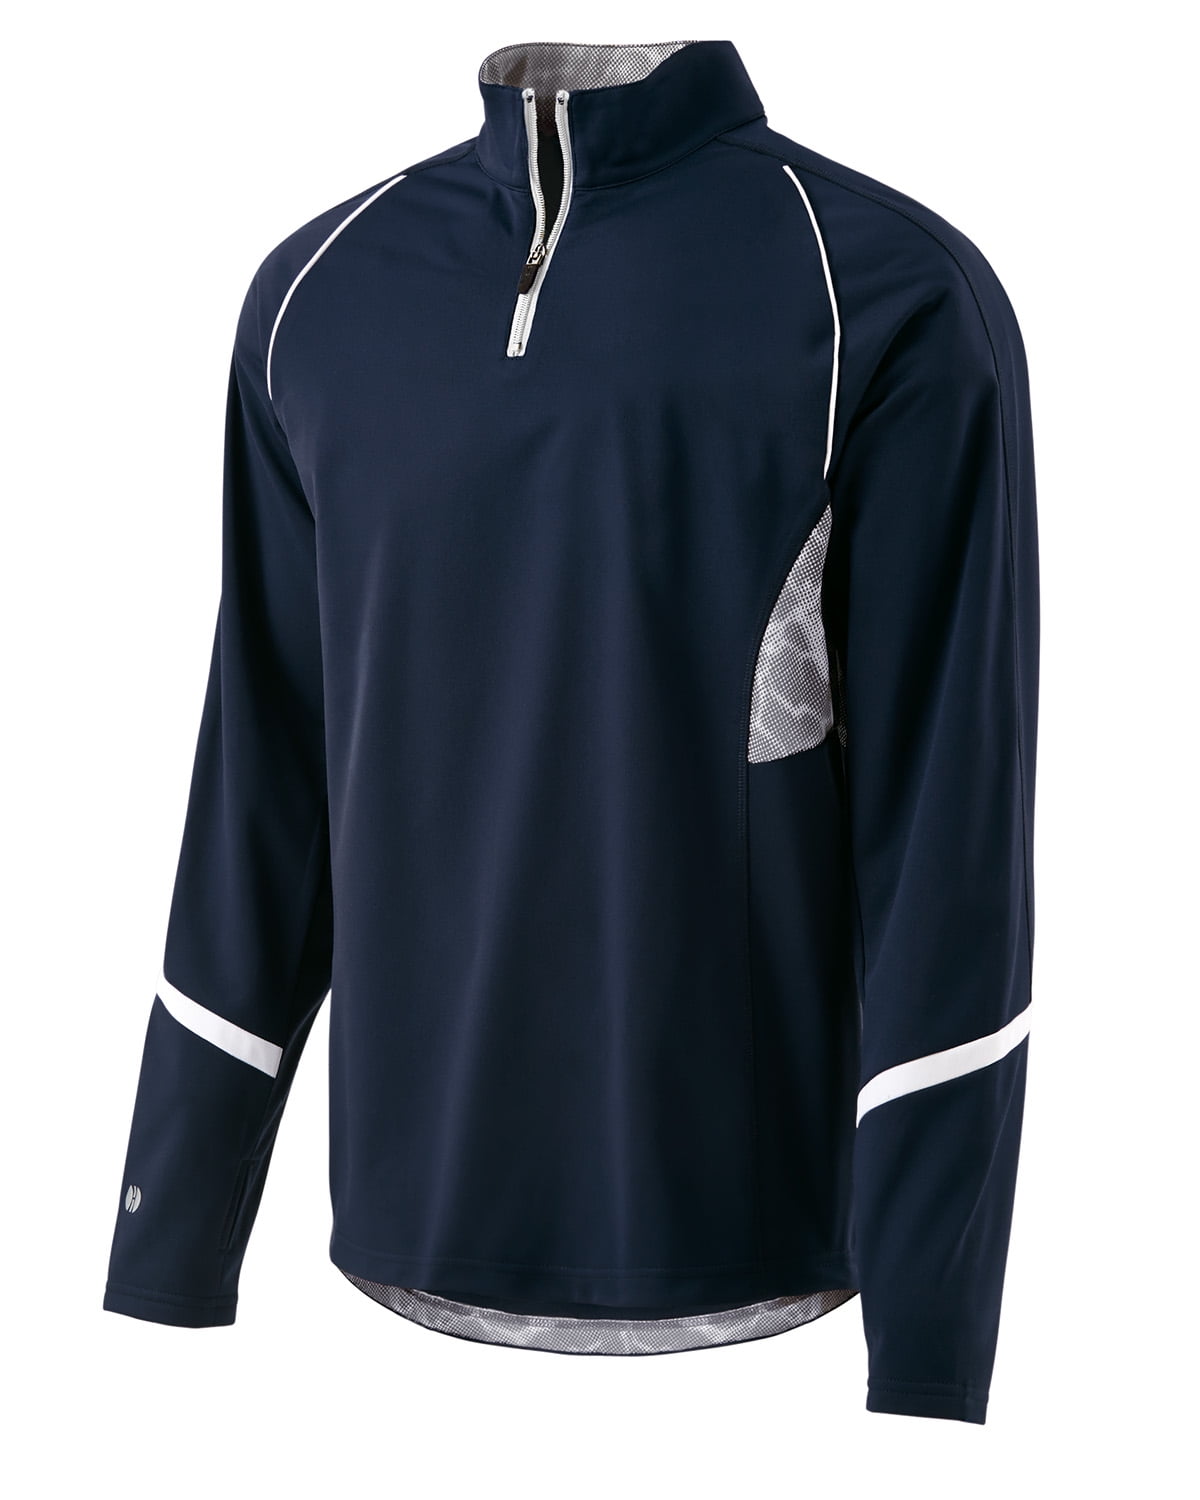 Holloway - A Product of Holloway Adult Polyester 1/4 Zip Tenacity ...